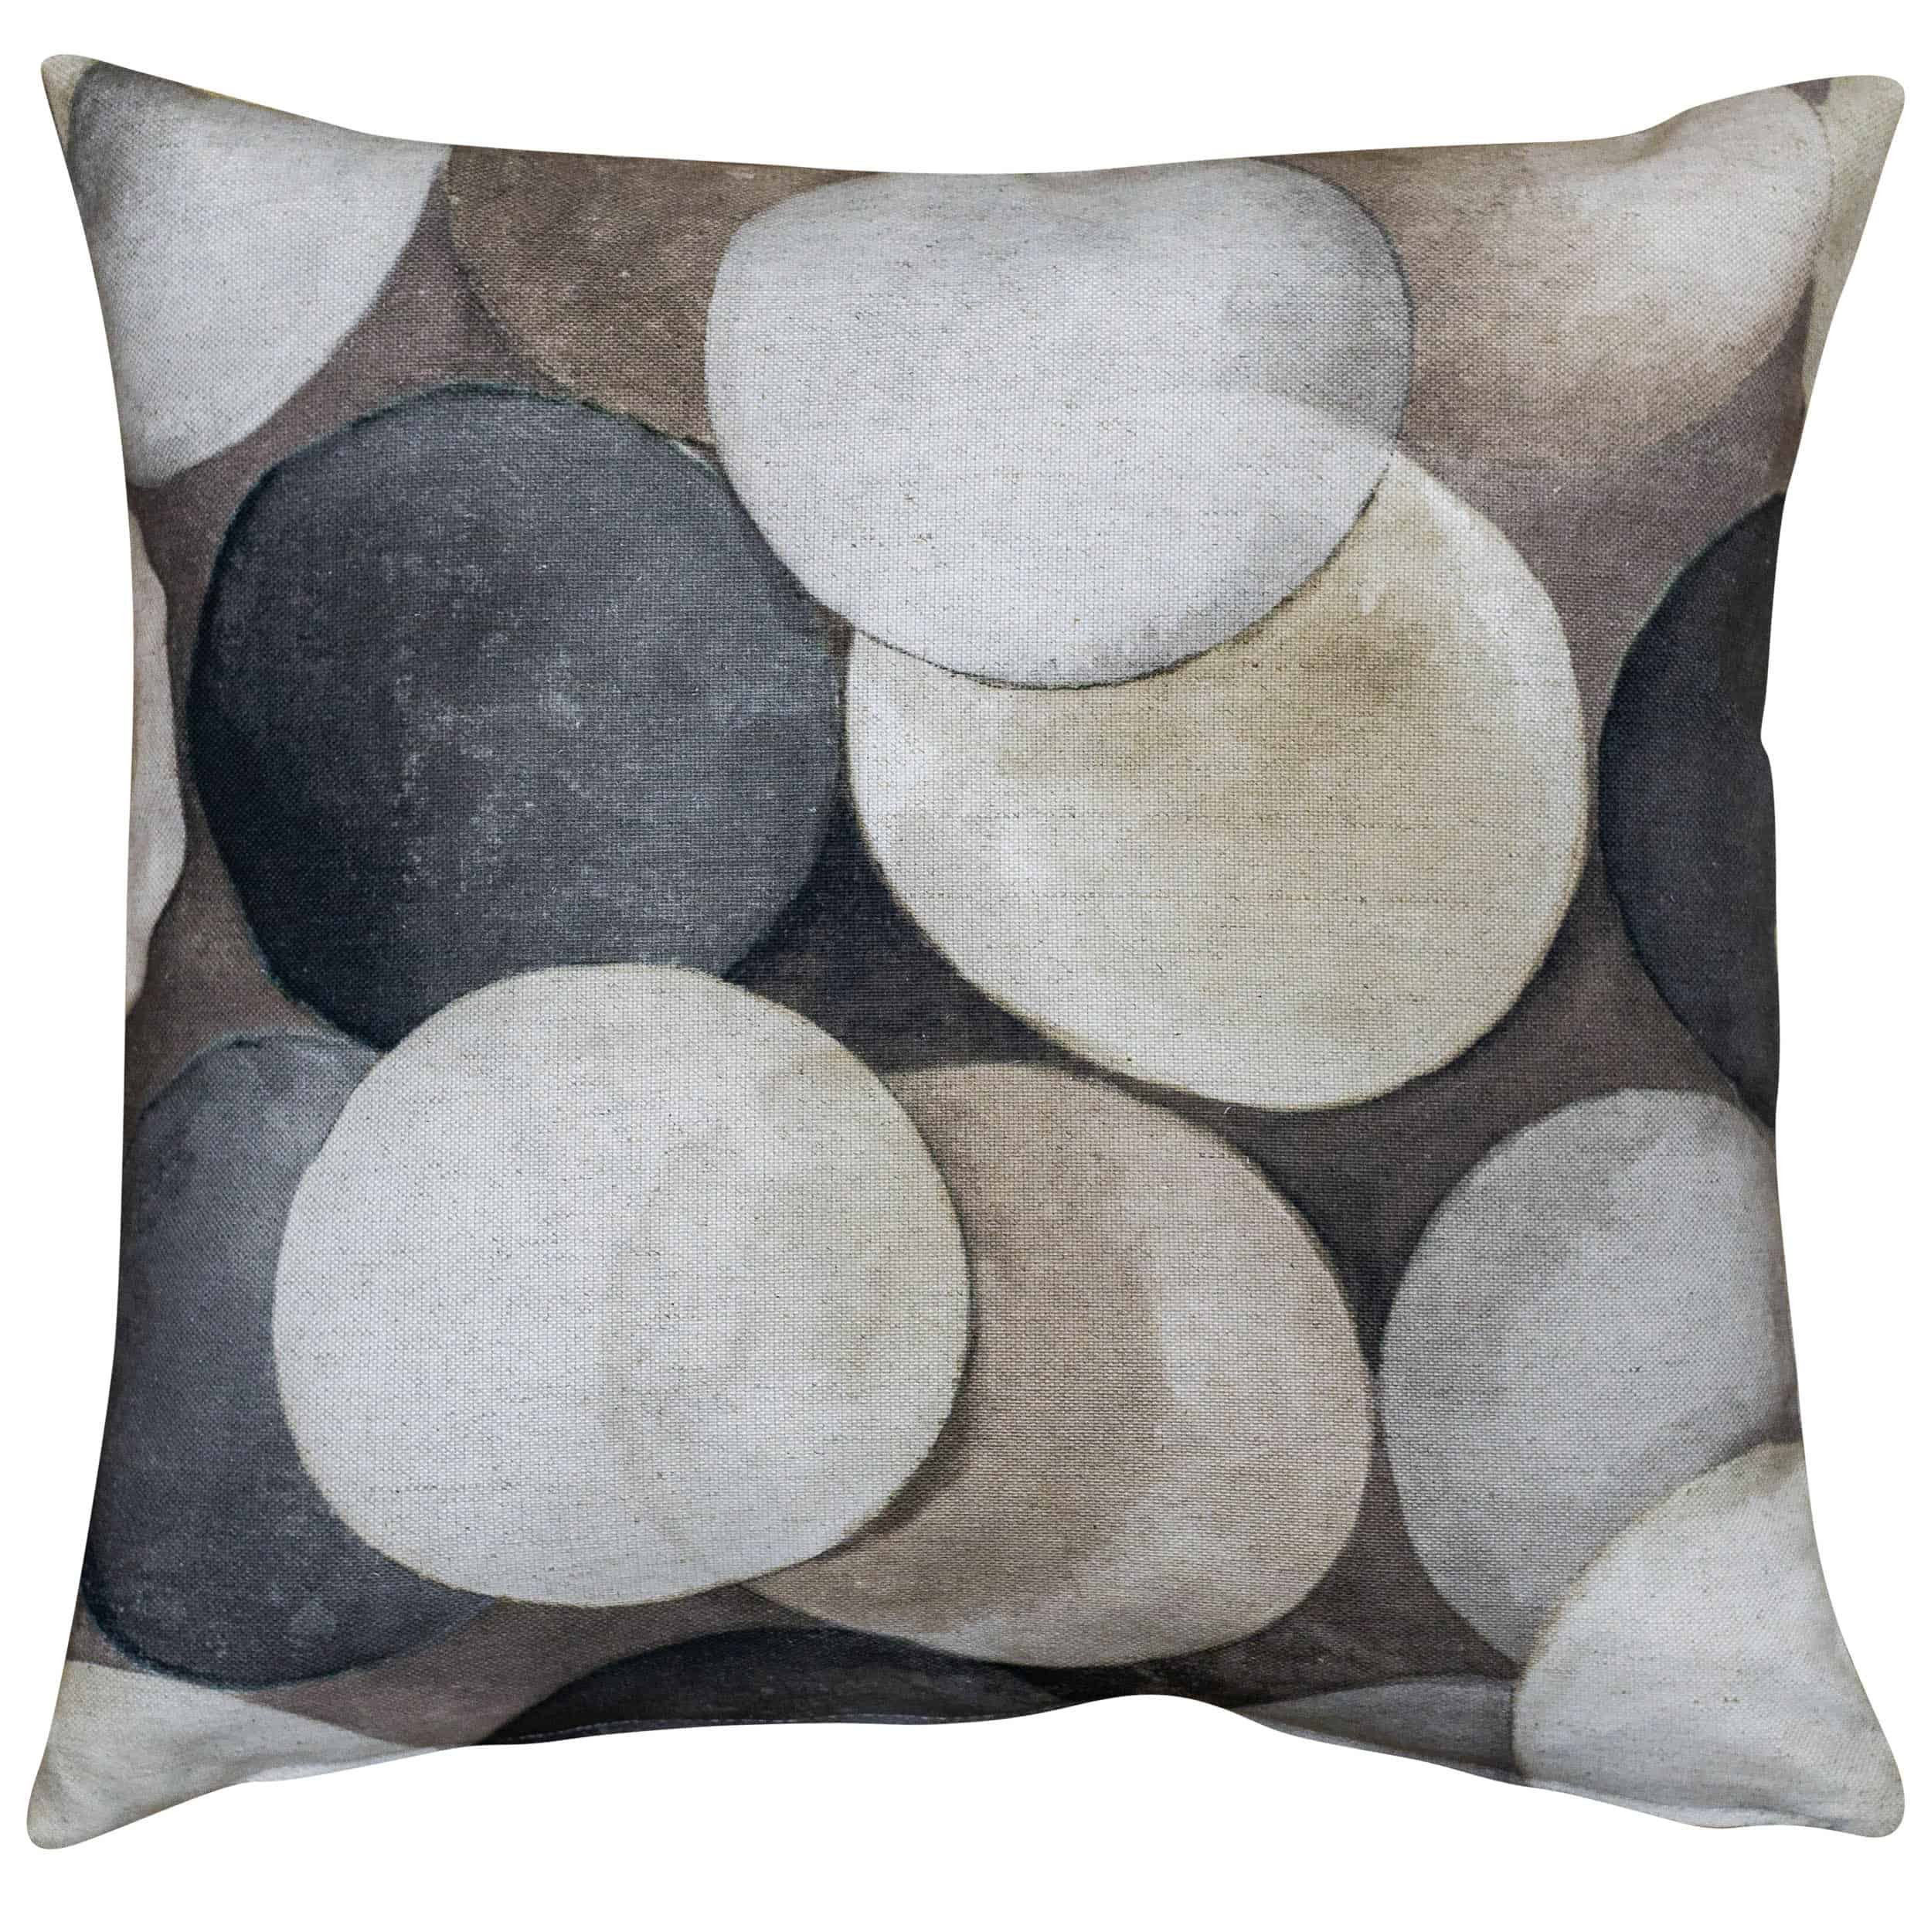 Zen Pebbles Cushion Cover in Natural